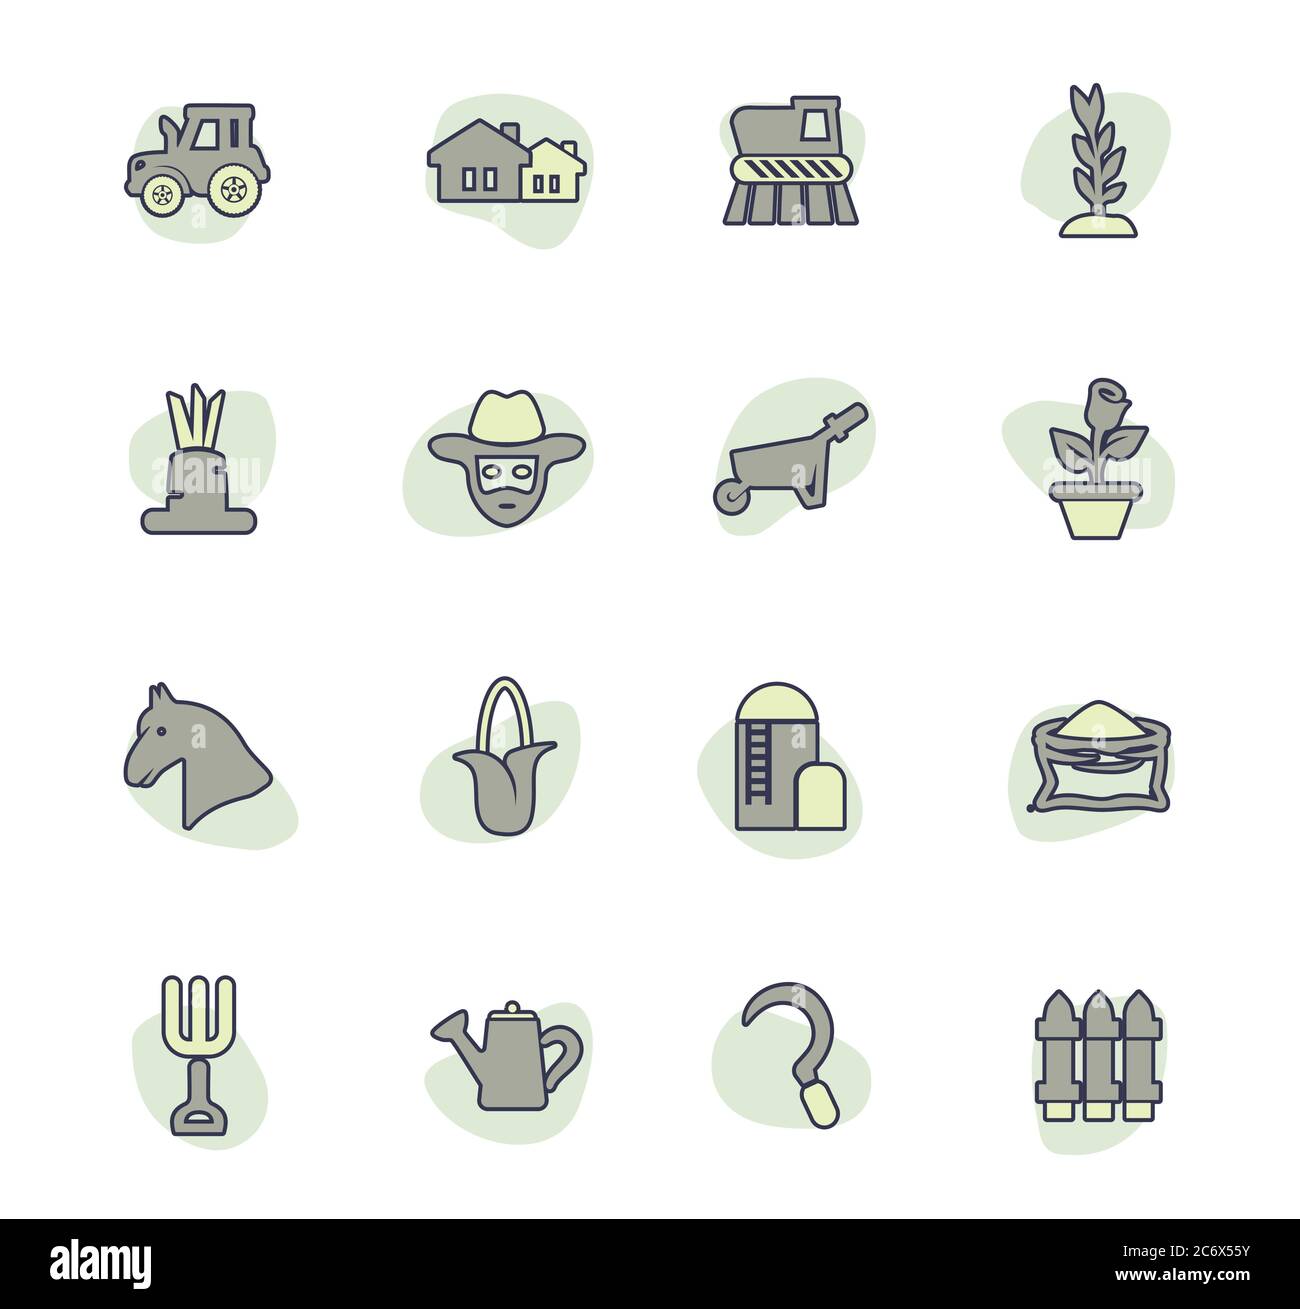 Agricultural icons set Stock Vector